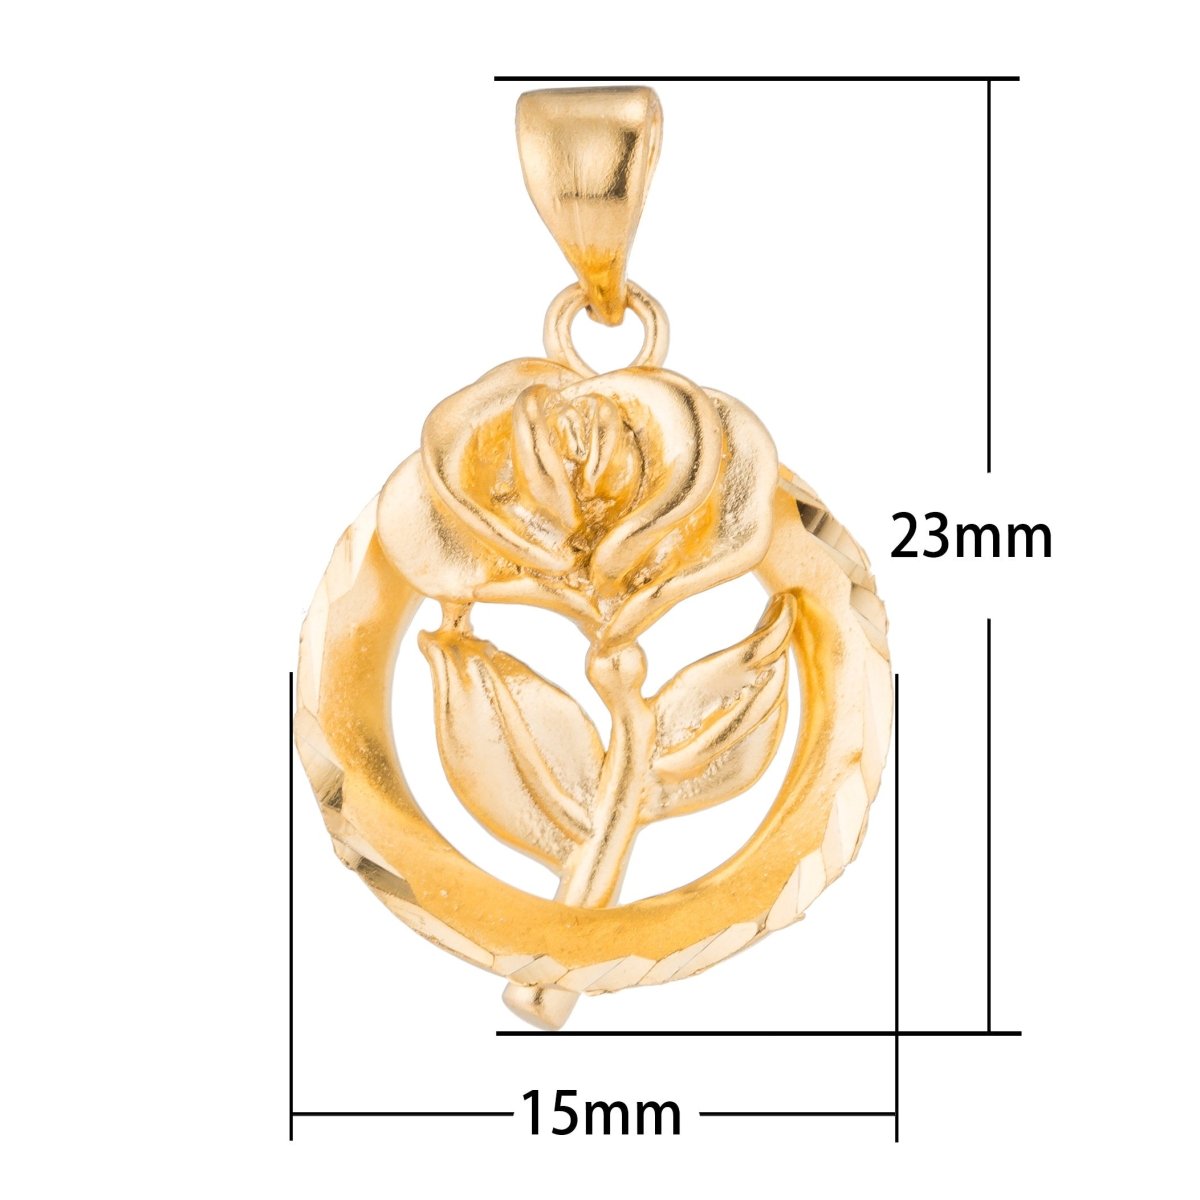 Gold Rose Wreath, Belle, Flower, Everlasting Love, Forever, Women, Lover, Necklace Pendant Charm Bead Bails Findings for Jewelry Making H-148 - DLUXCA